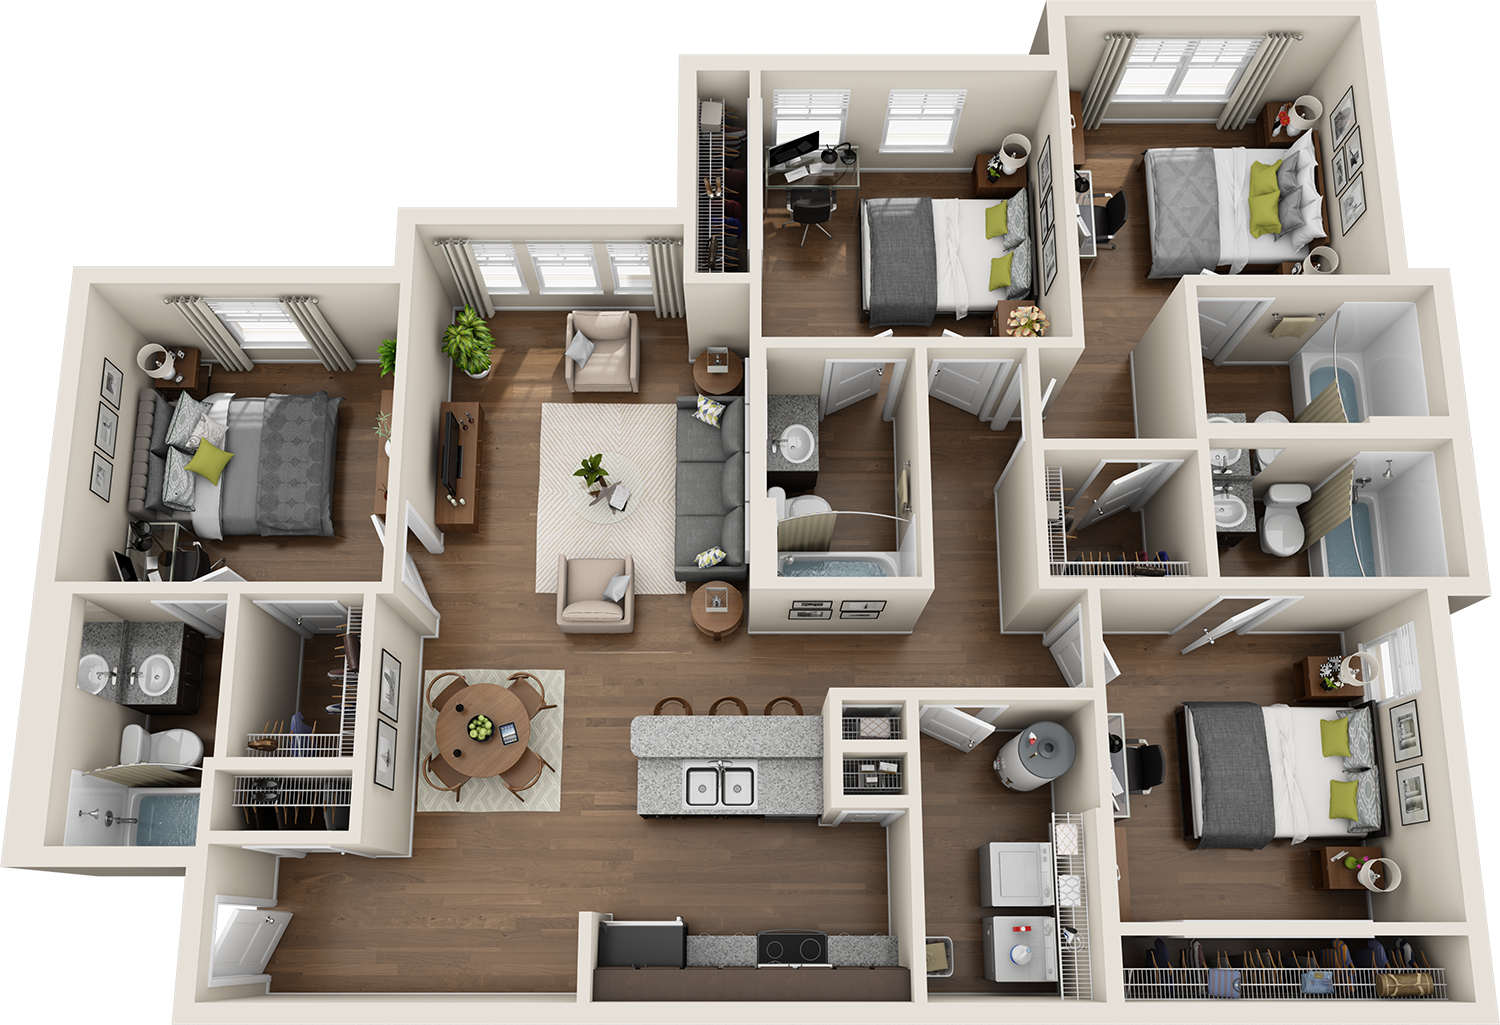 unit d1 example floor plan at forum at tallahassee student apartments